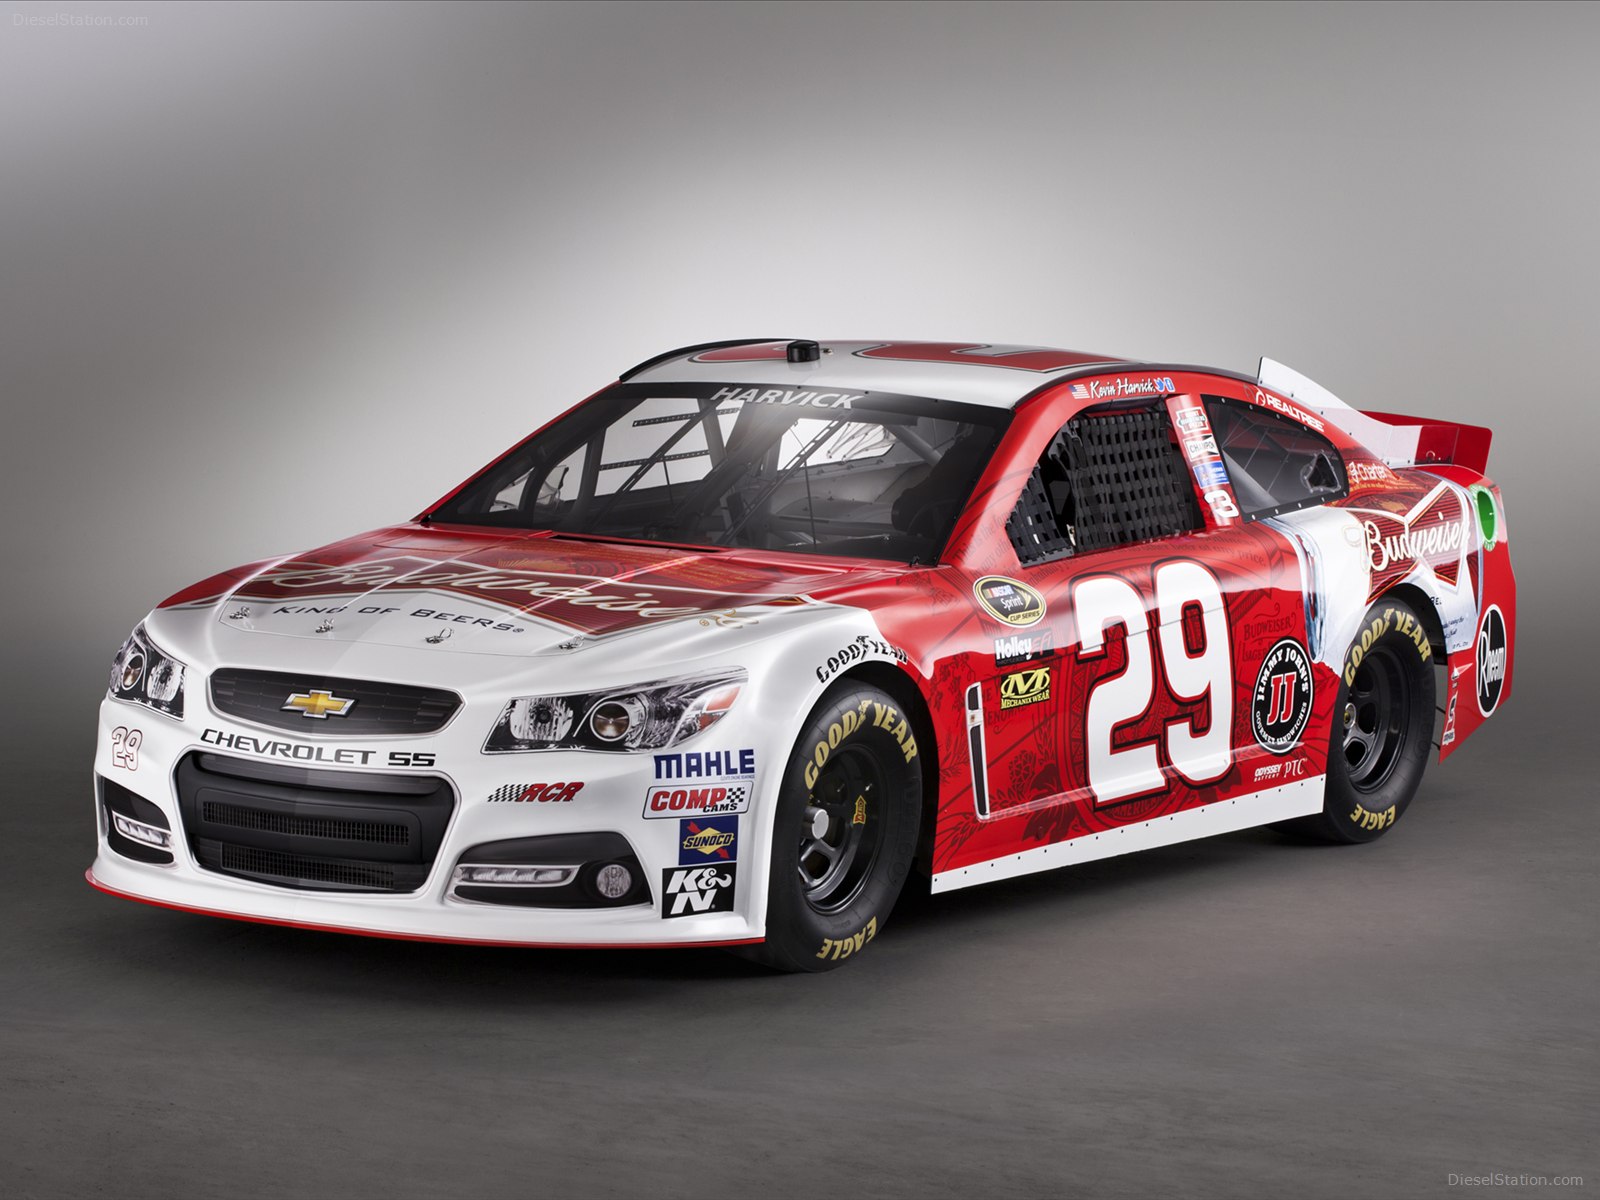 Chevrolet Nascar Ss Race Car Exotic Pictures Of